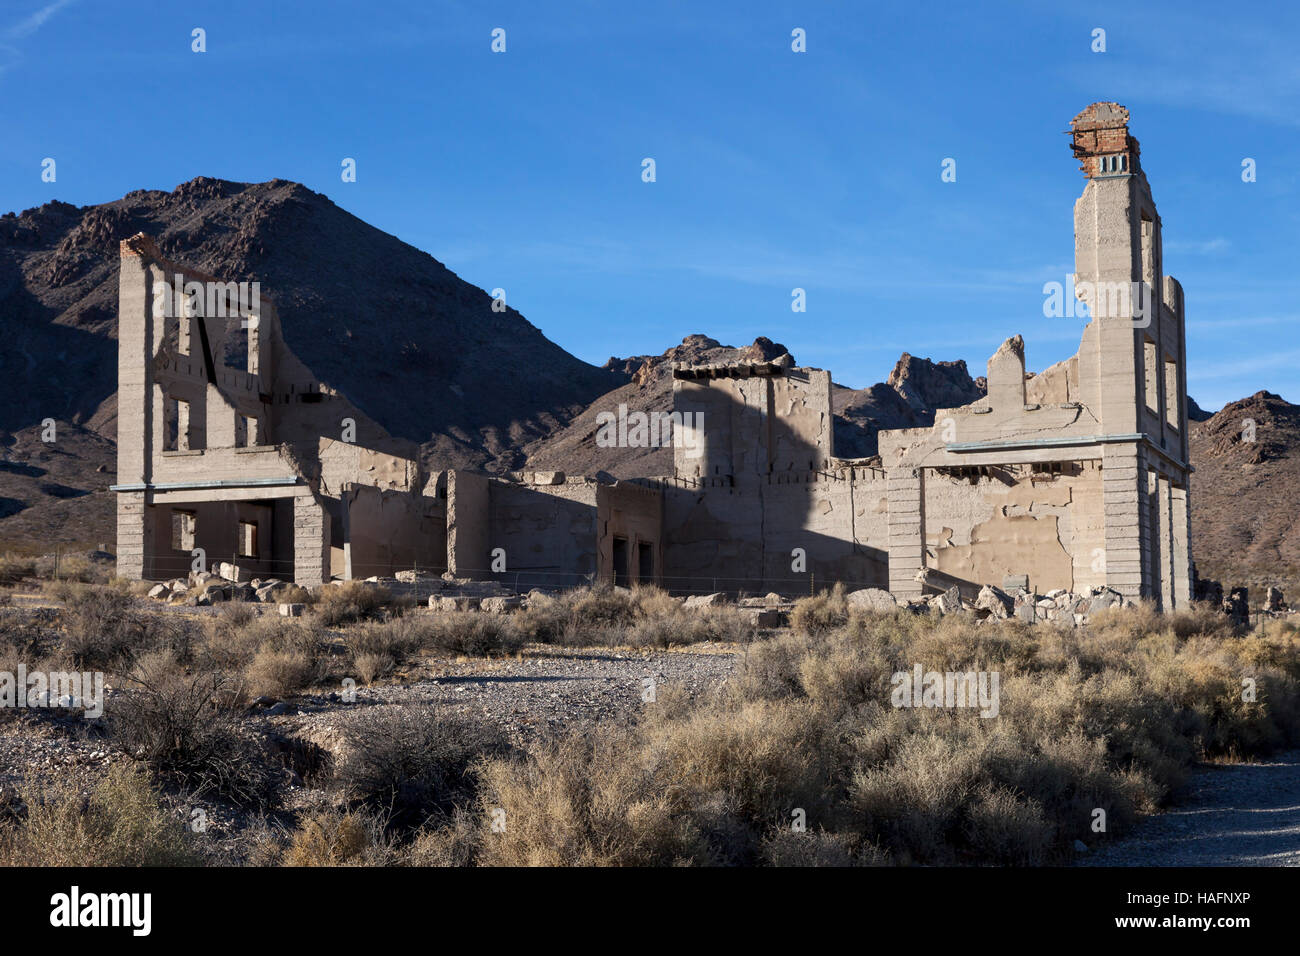 The remains of the Cook Bank Building still dominate the Rhyolite skyline just as it did when it was built in the early 1900's at a cost of $90,000. T Stock Photo